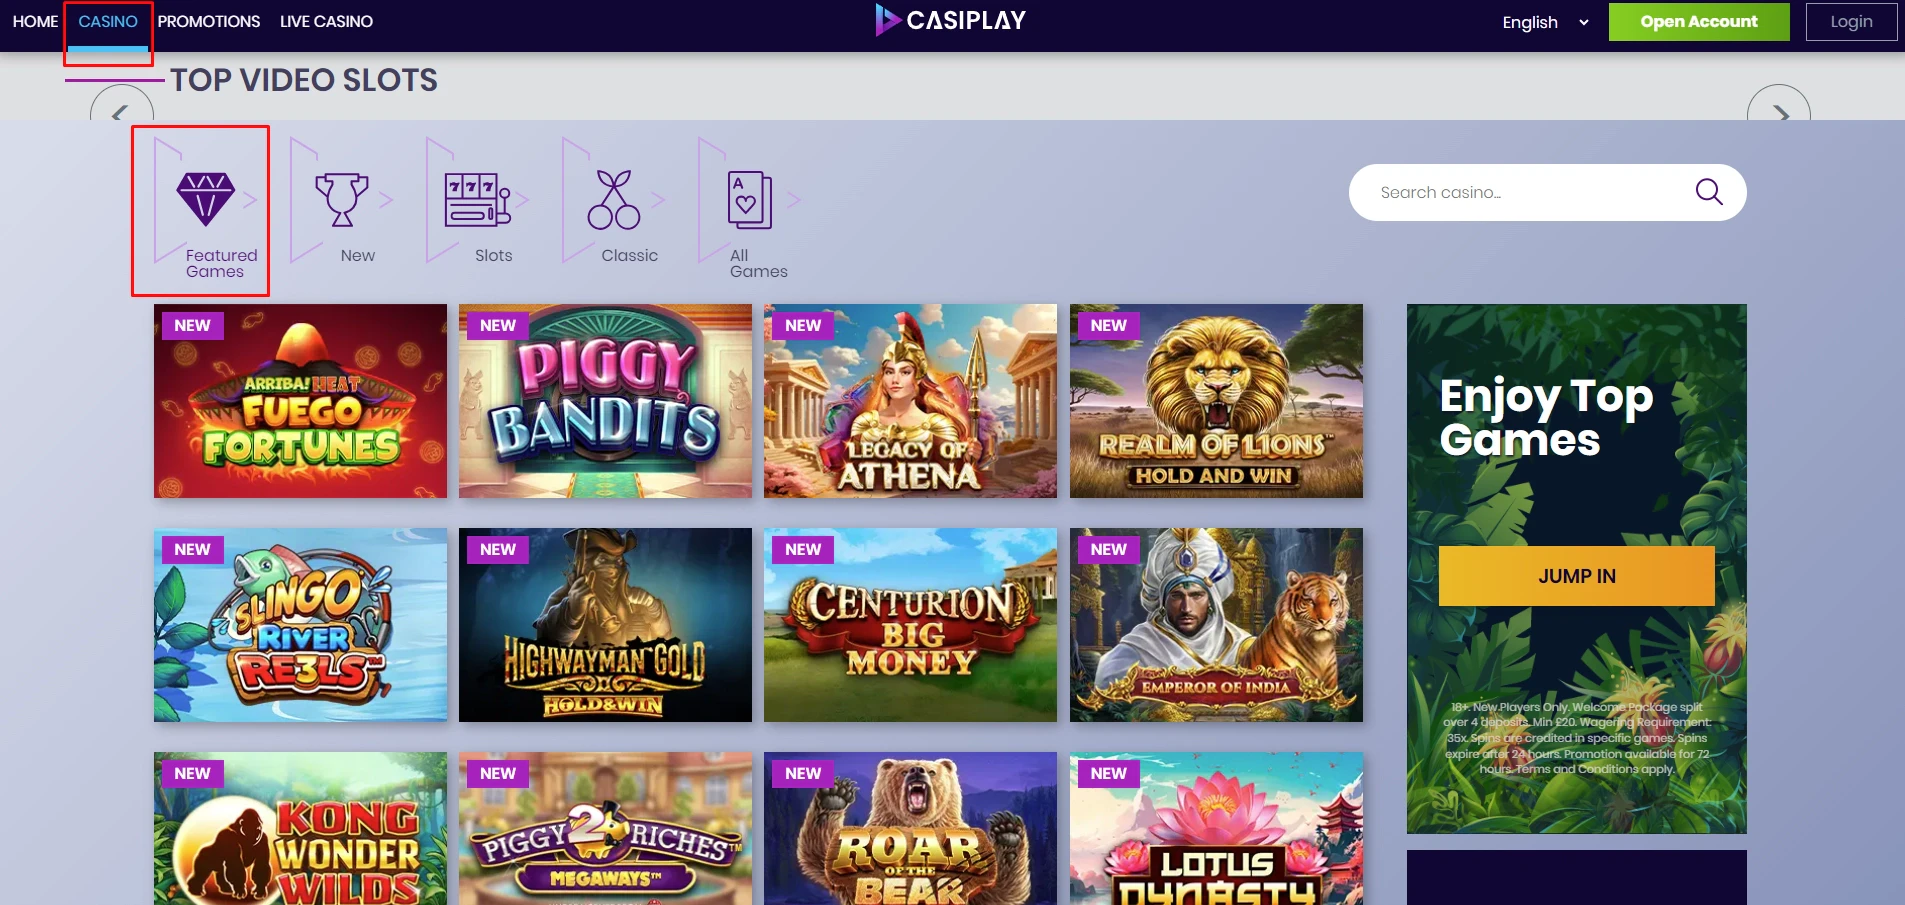 Casiplay Game Library